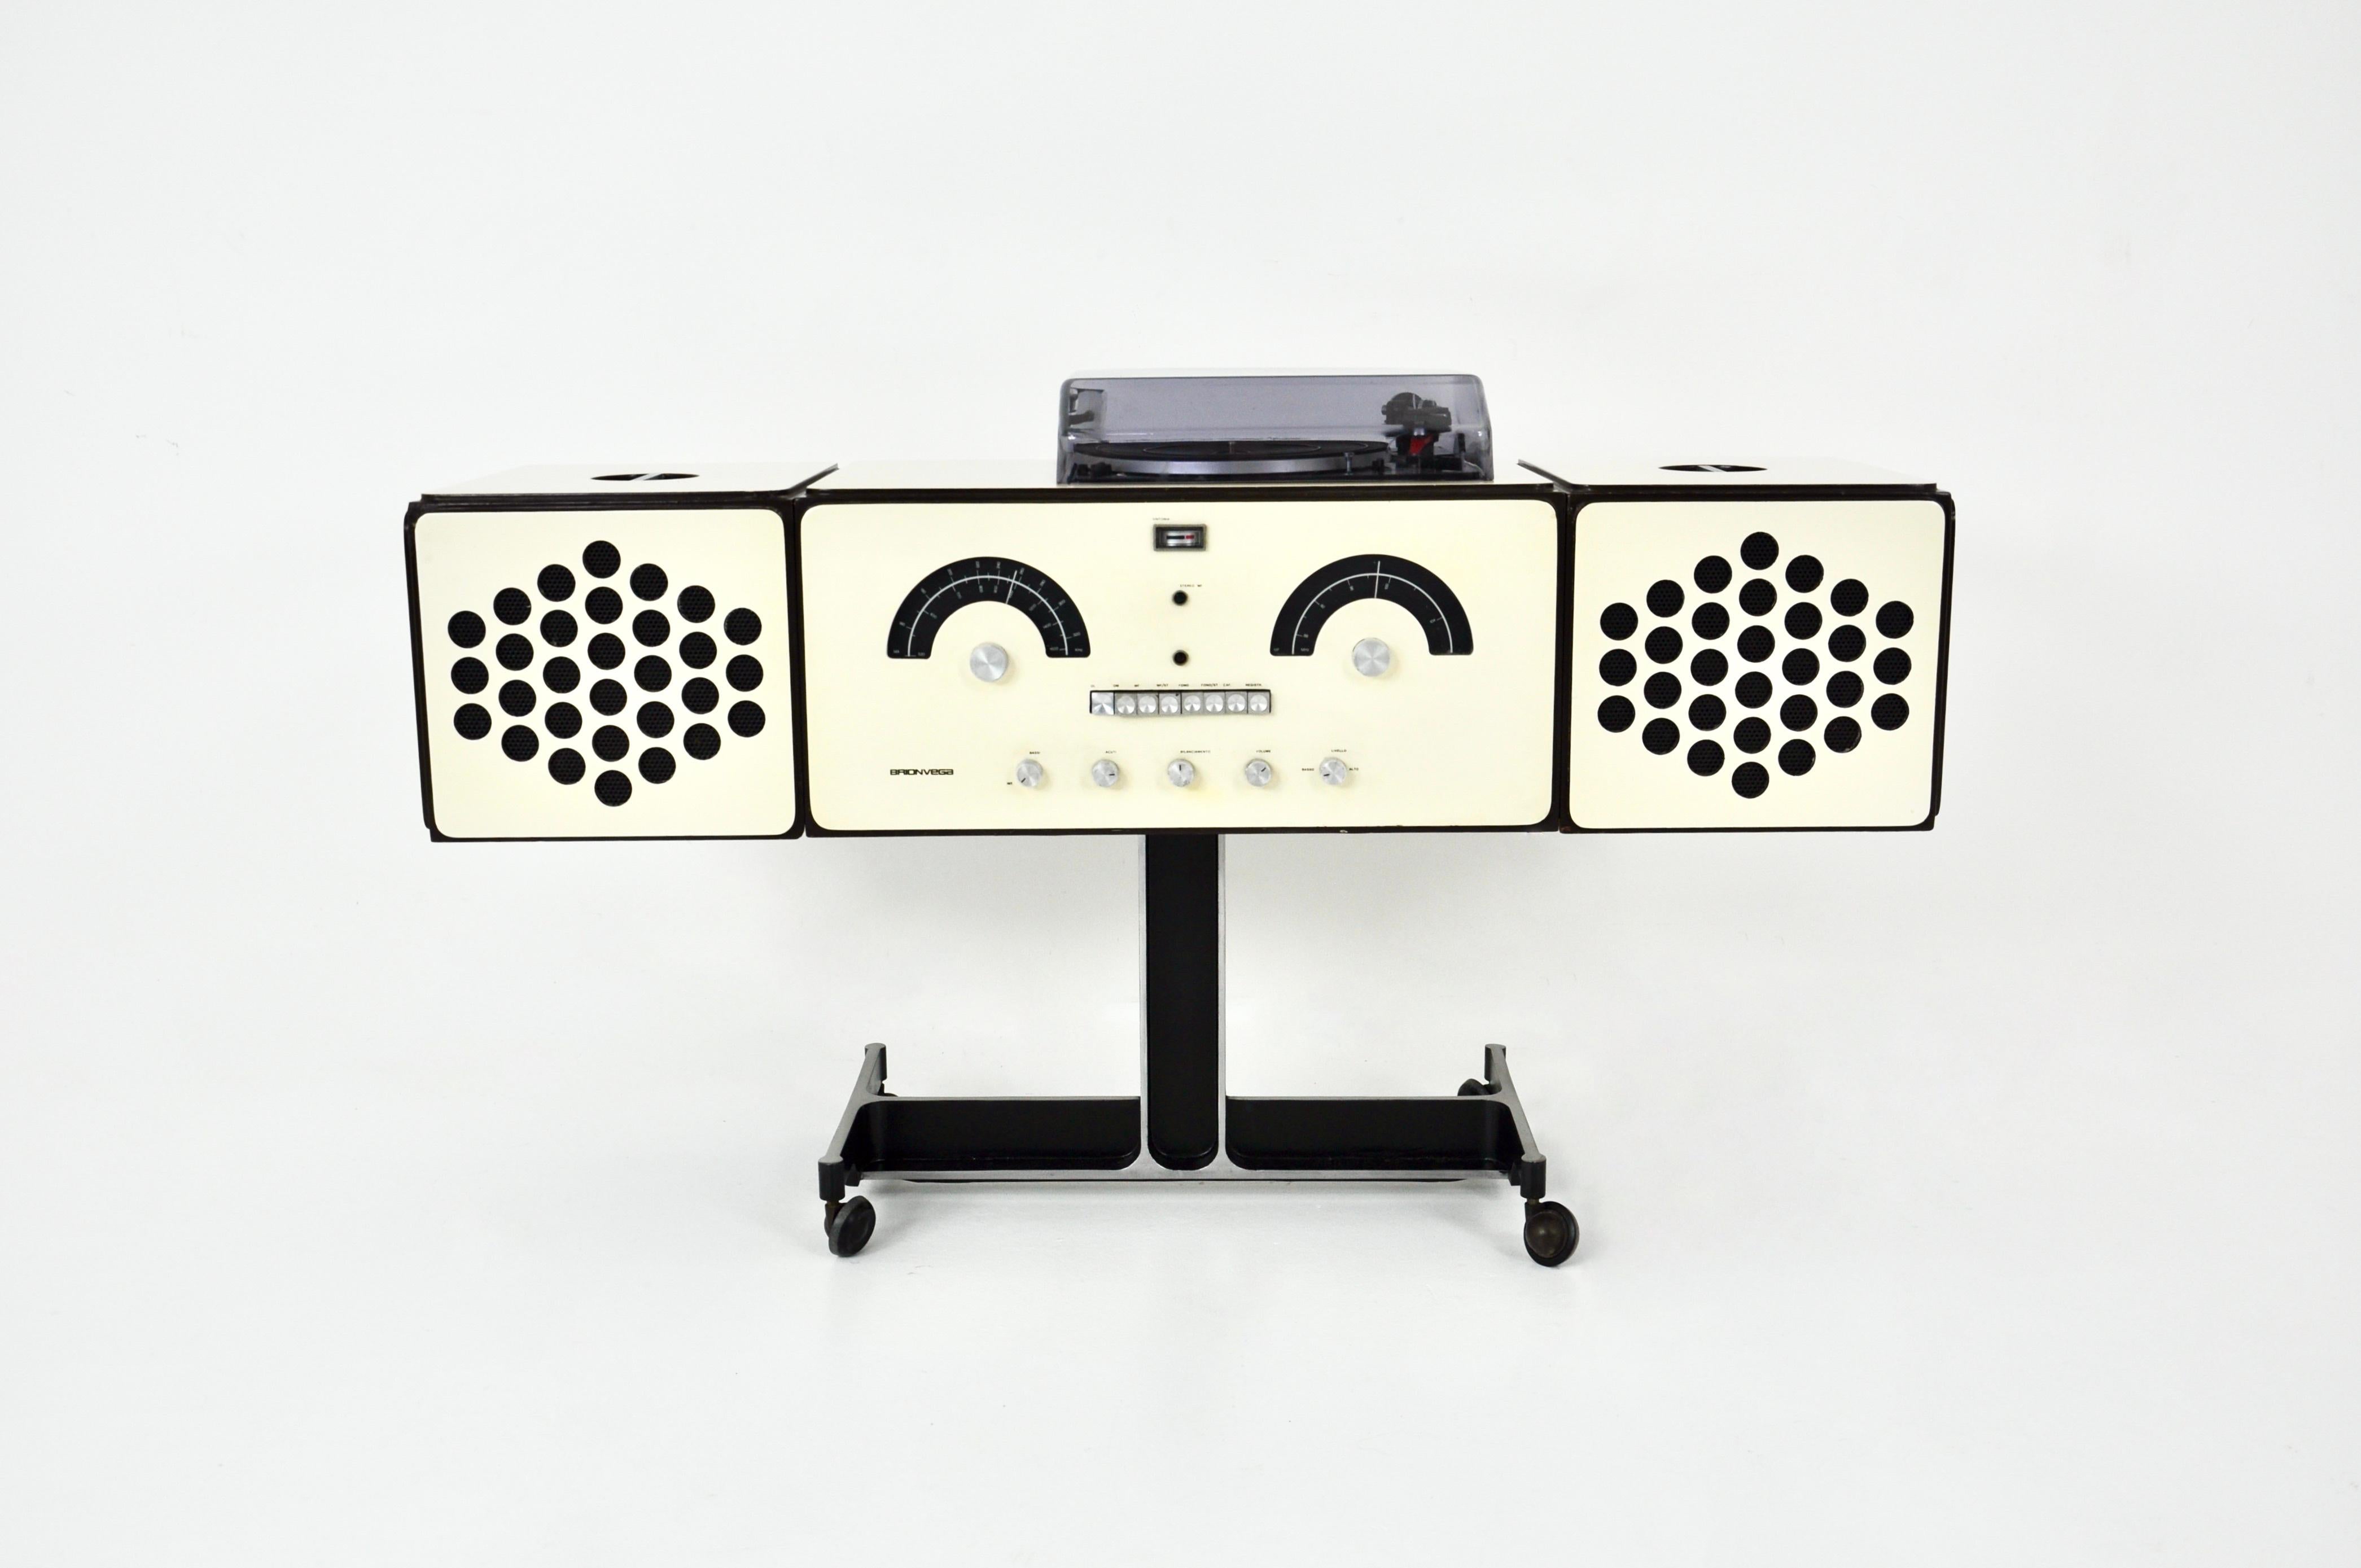 White Brionvega stereo radio. The radio and record player work perfectly. There is also a bluethoot to connect the mobile phone. It has been completely overhauled by an engineer. Dimensions when closed: height 92 cm, width 62 cm, depth 37 cm. Wear